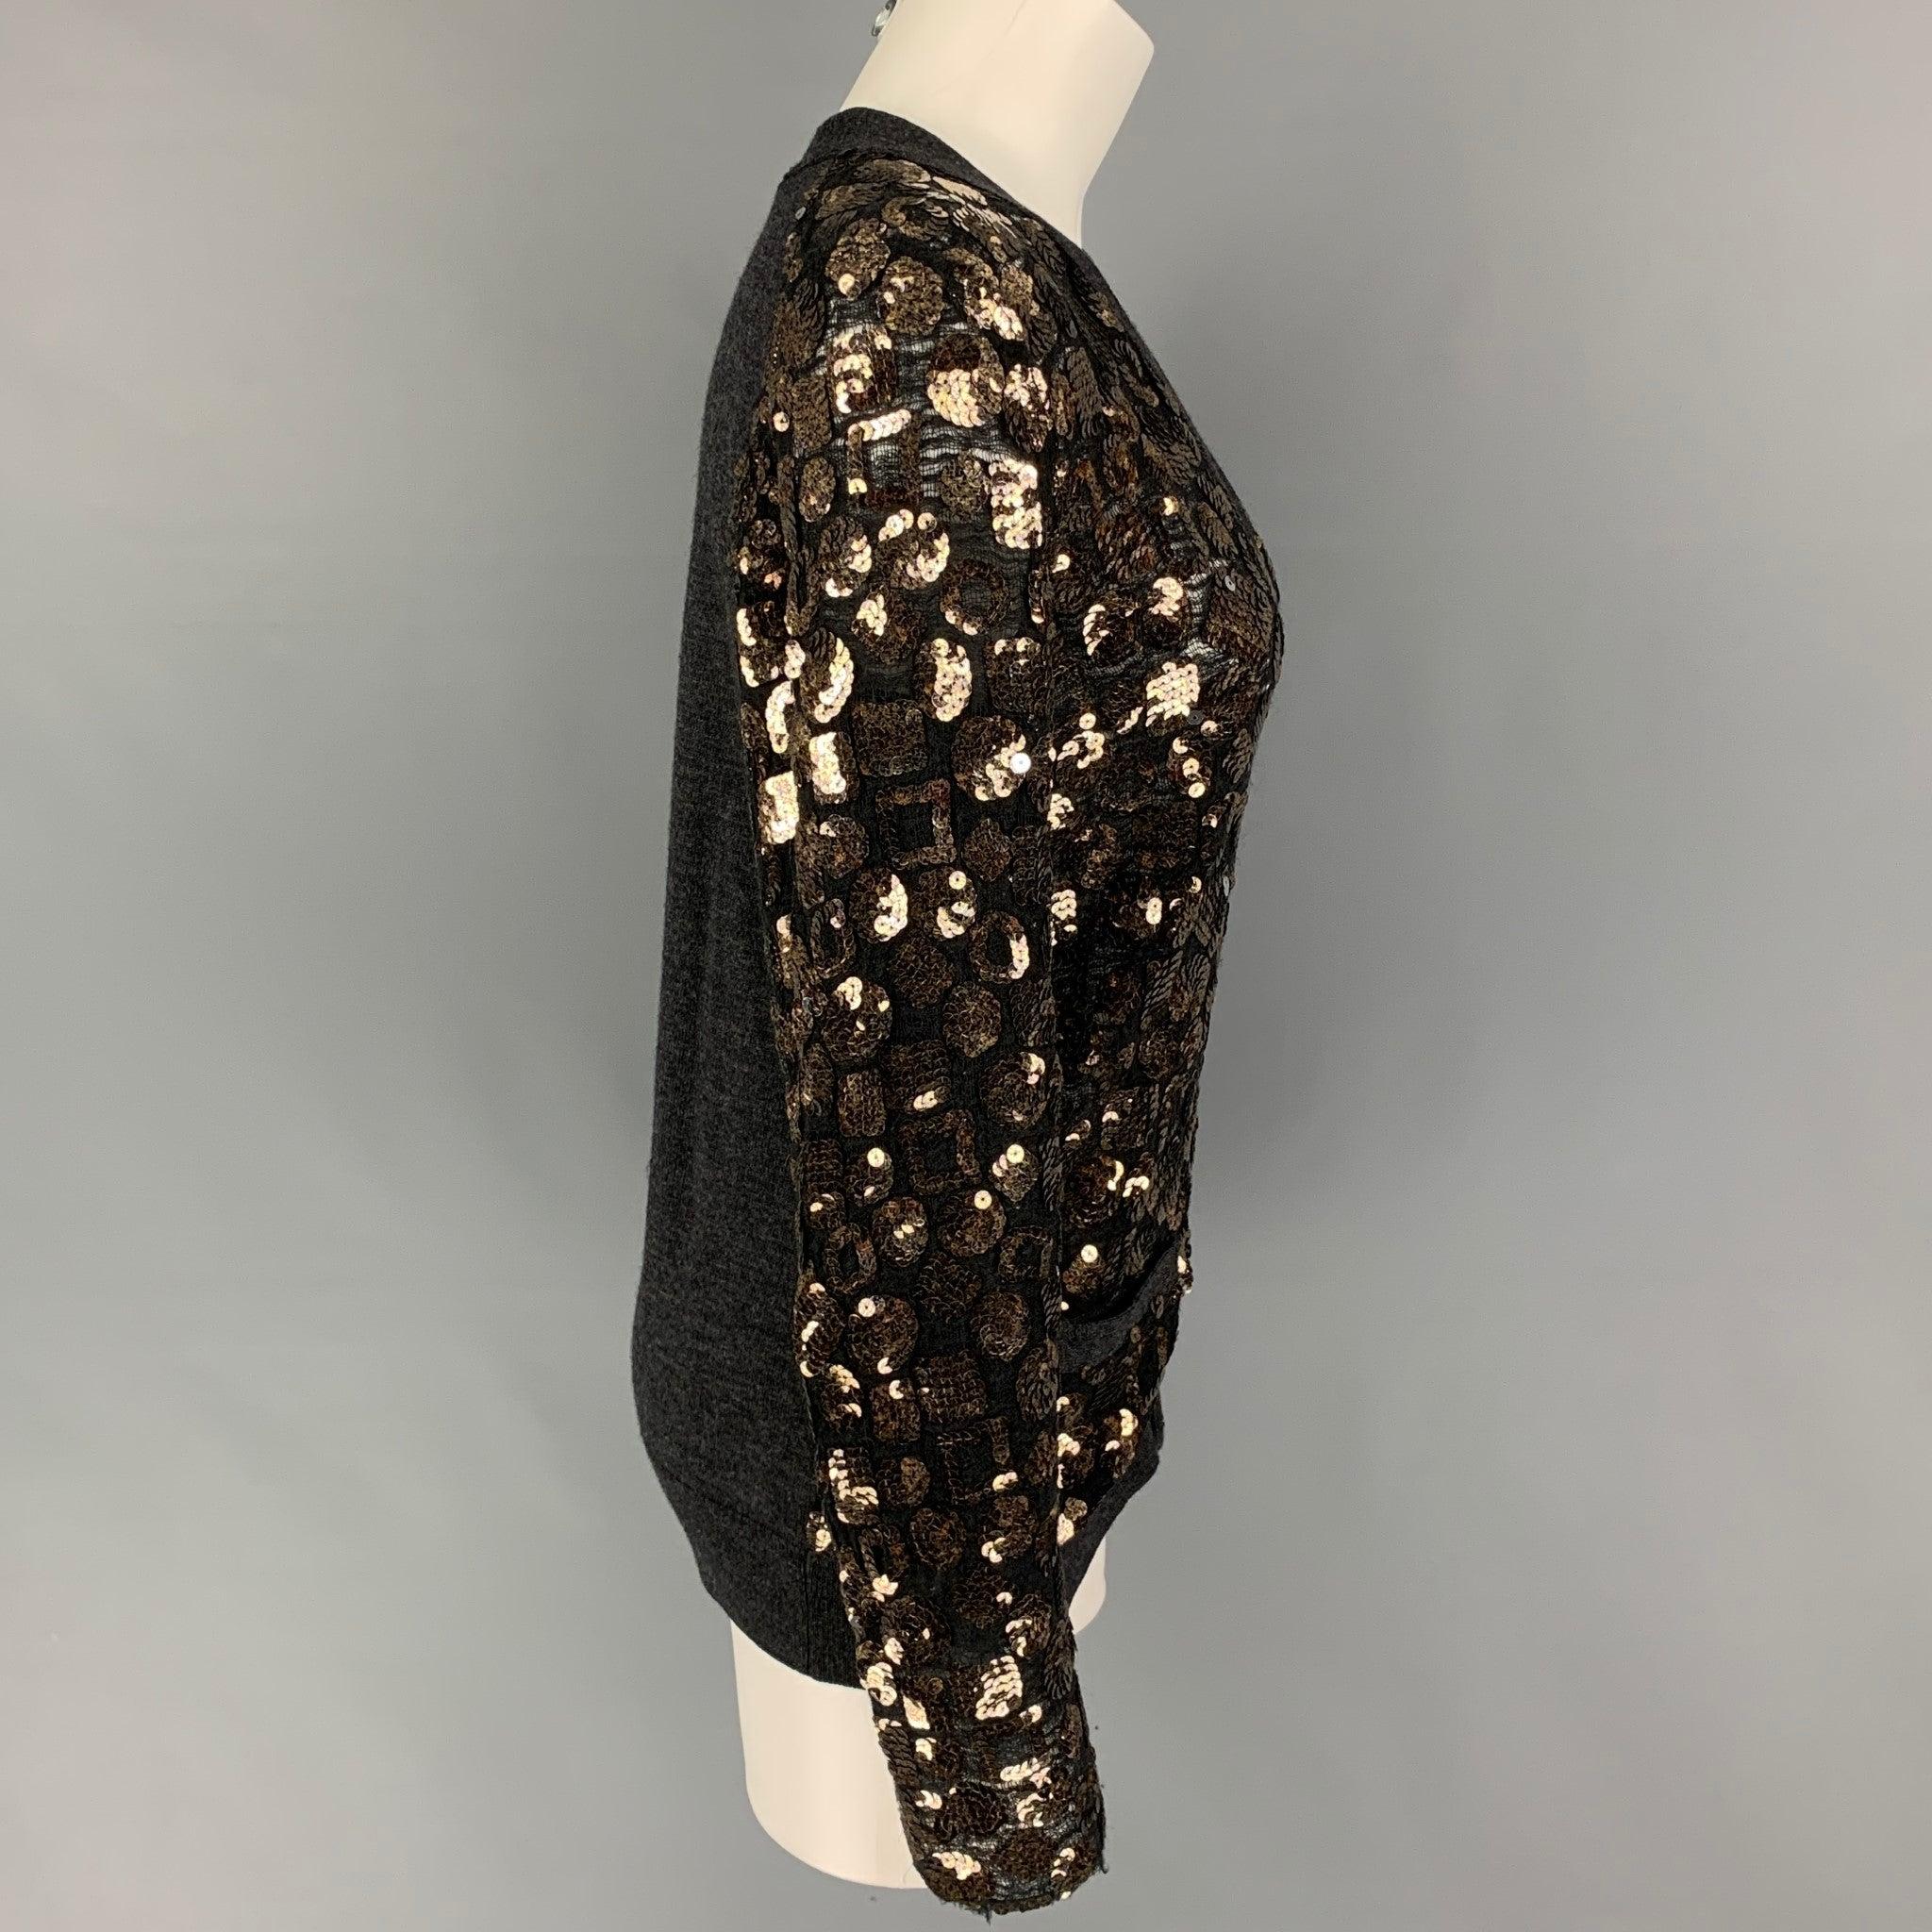 MARC JACOBS cardigan comes in a charcoal merino wool with a gold sequined design featuring front pockets and a buttoned closure. Made in Italy. Very Good
Pre-Owned Condition. 

Marked:   S 

Measurements: 
 
Shoulder: 15 inches  Bust: 34 inches 